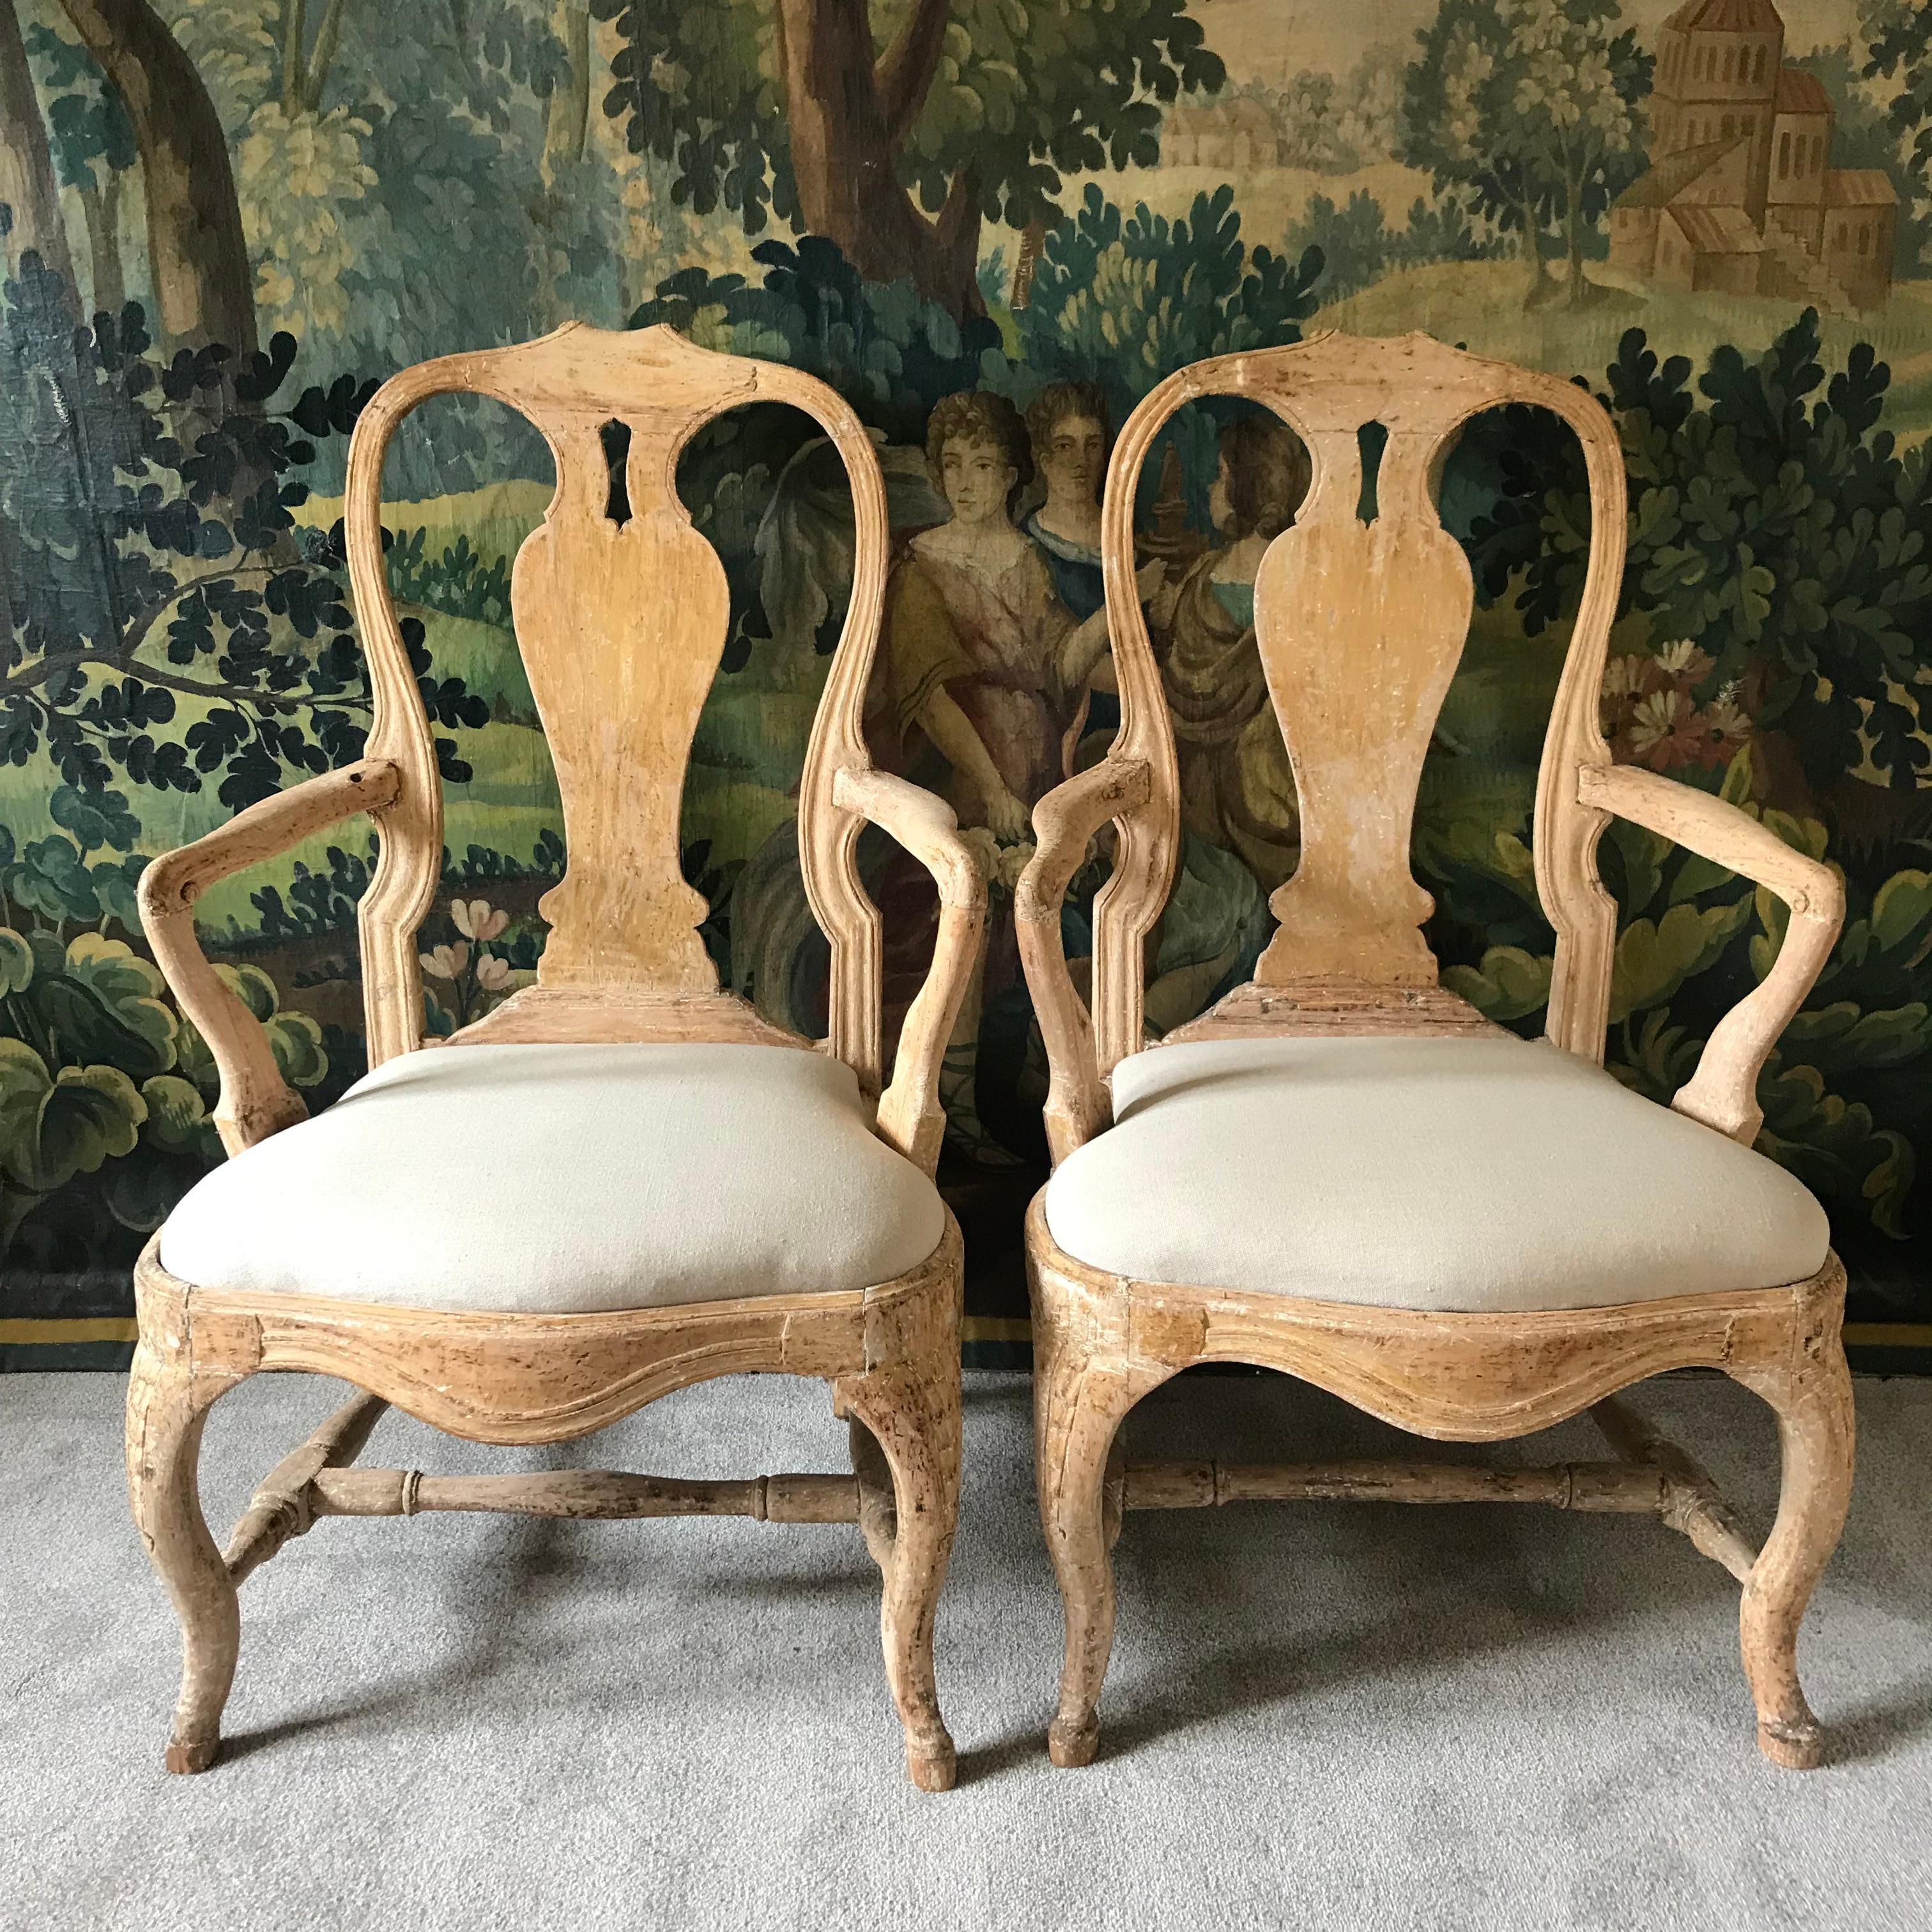 Rococo Pair of 18th Century Swedish Chairs For Sale